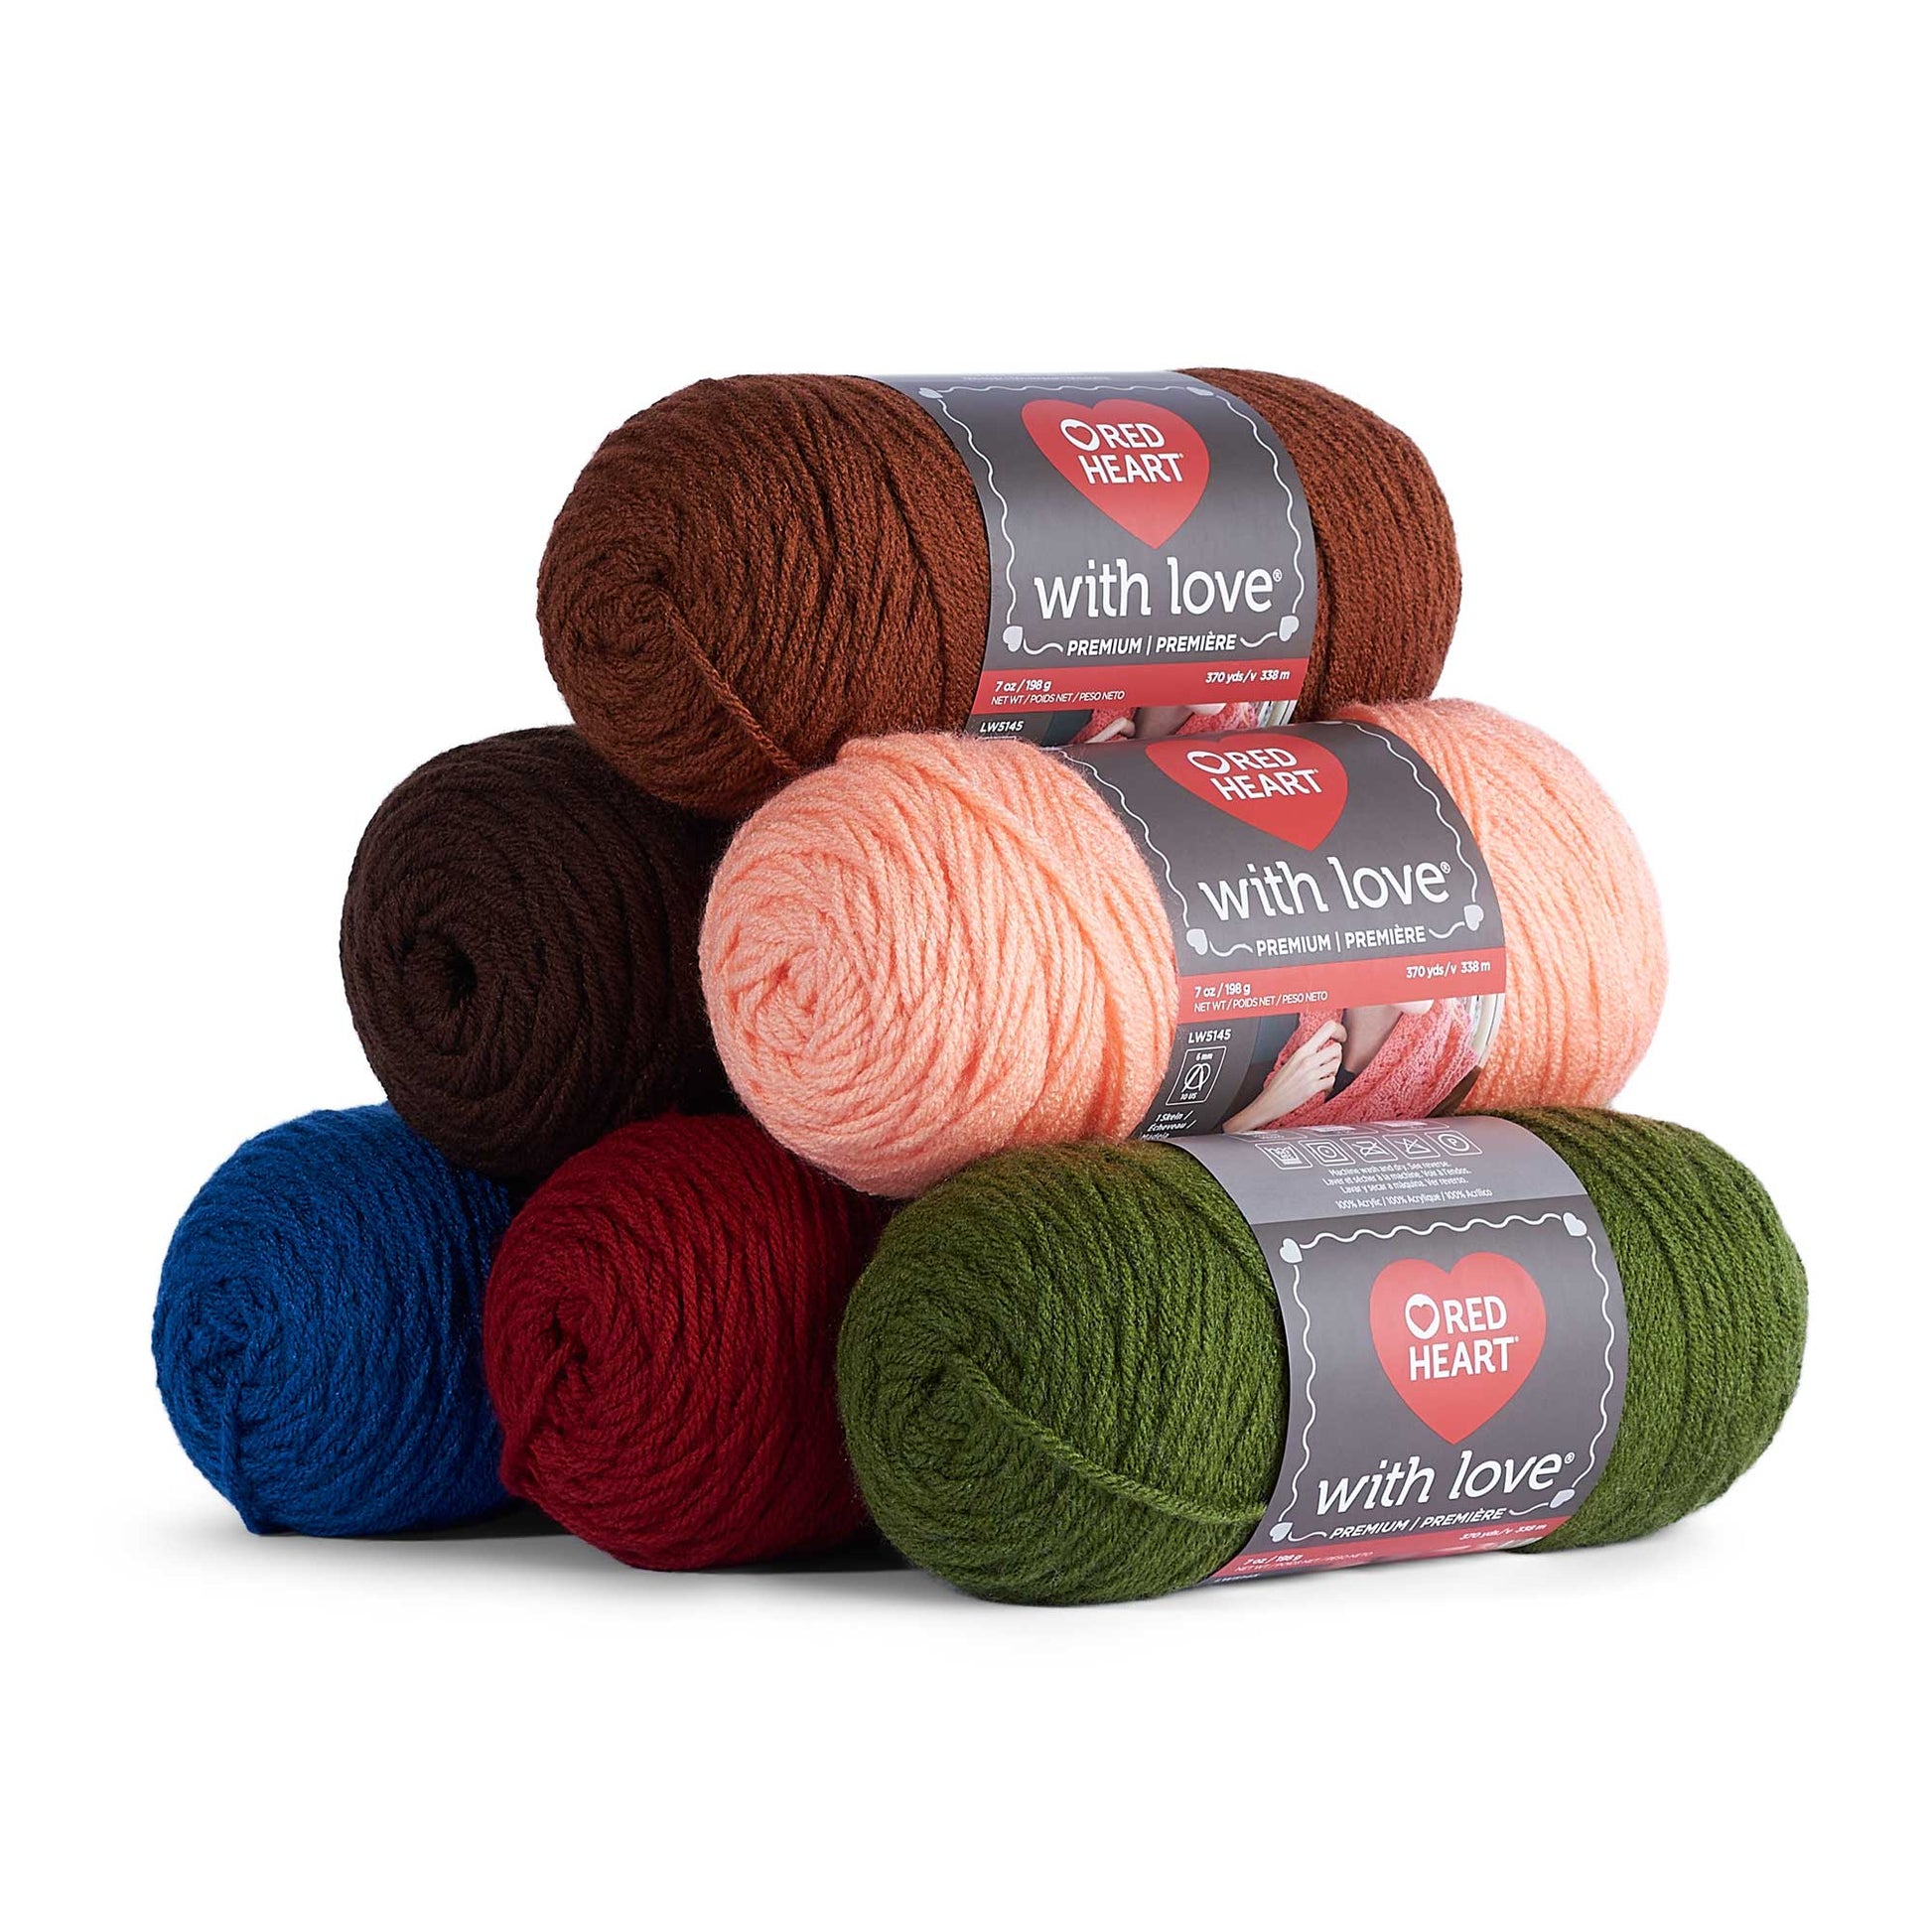 Wool & Knitting, Wool, Red Heart, With Love